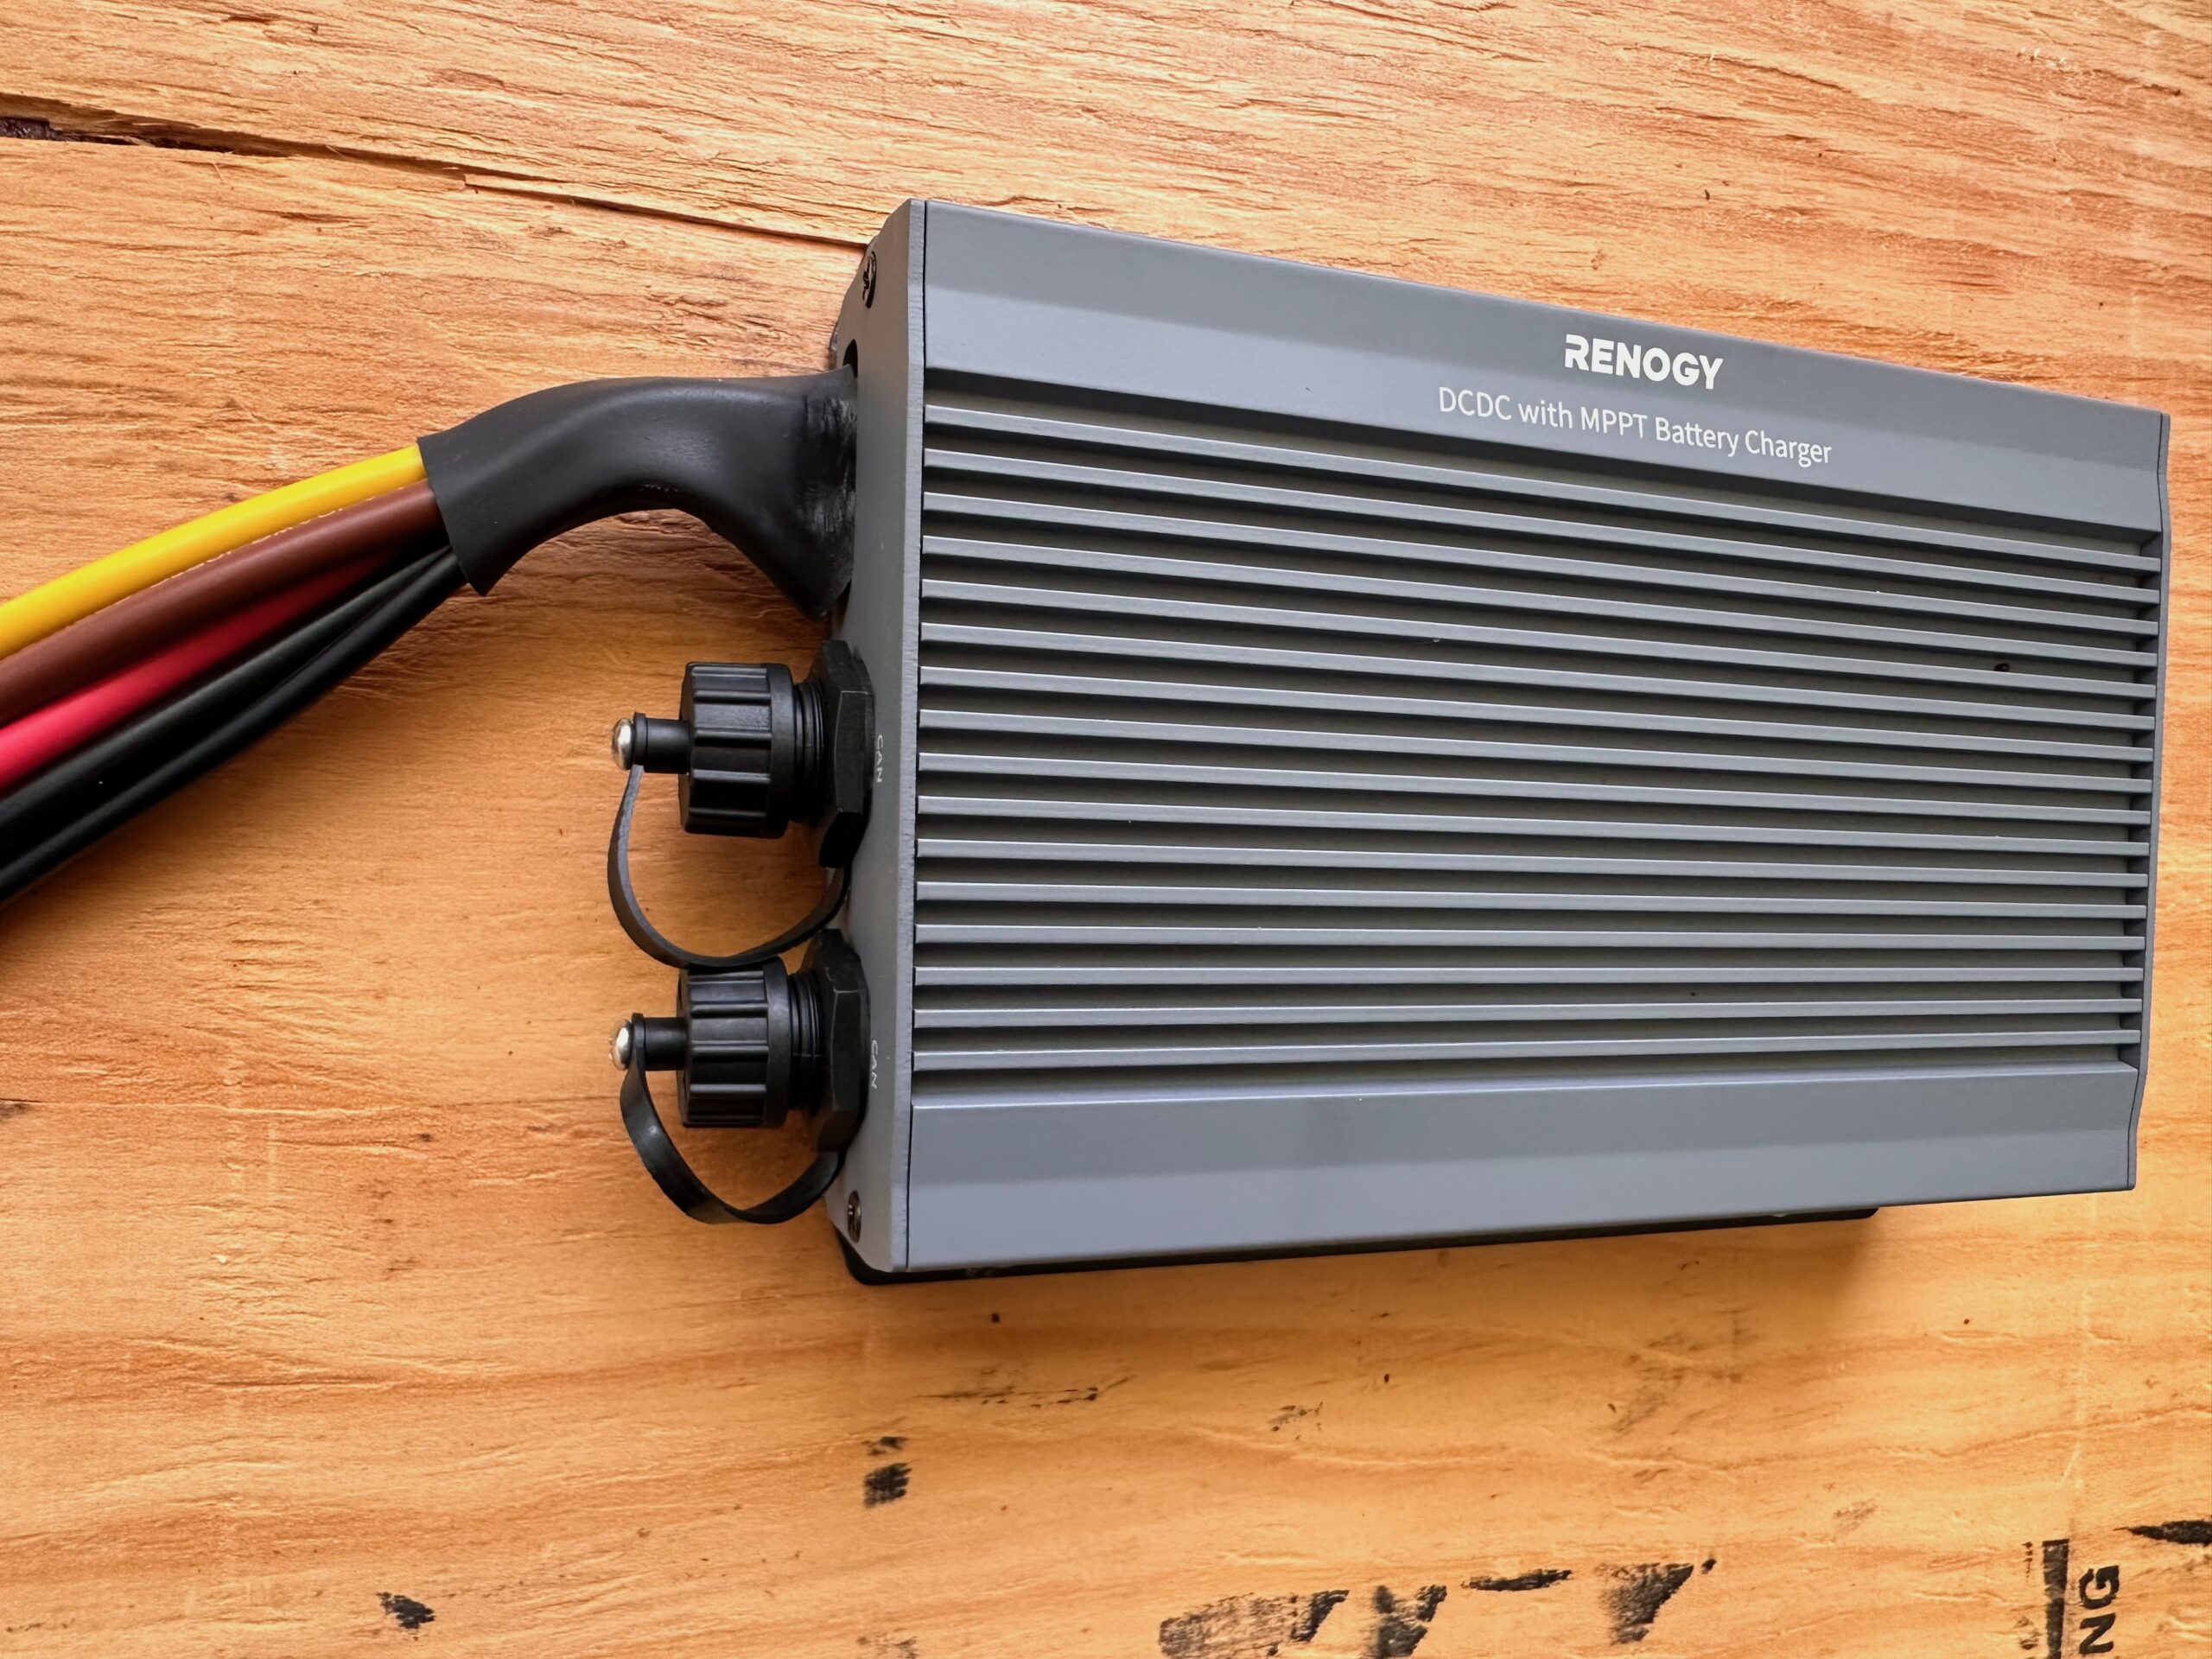 Renogy DC/DC Battery Charger With MPPT For Off-Grid Adventures – CleanTechnica Tested